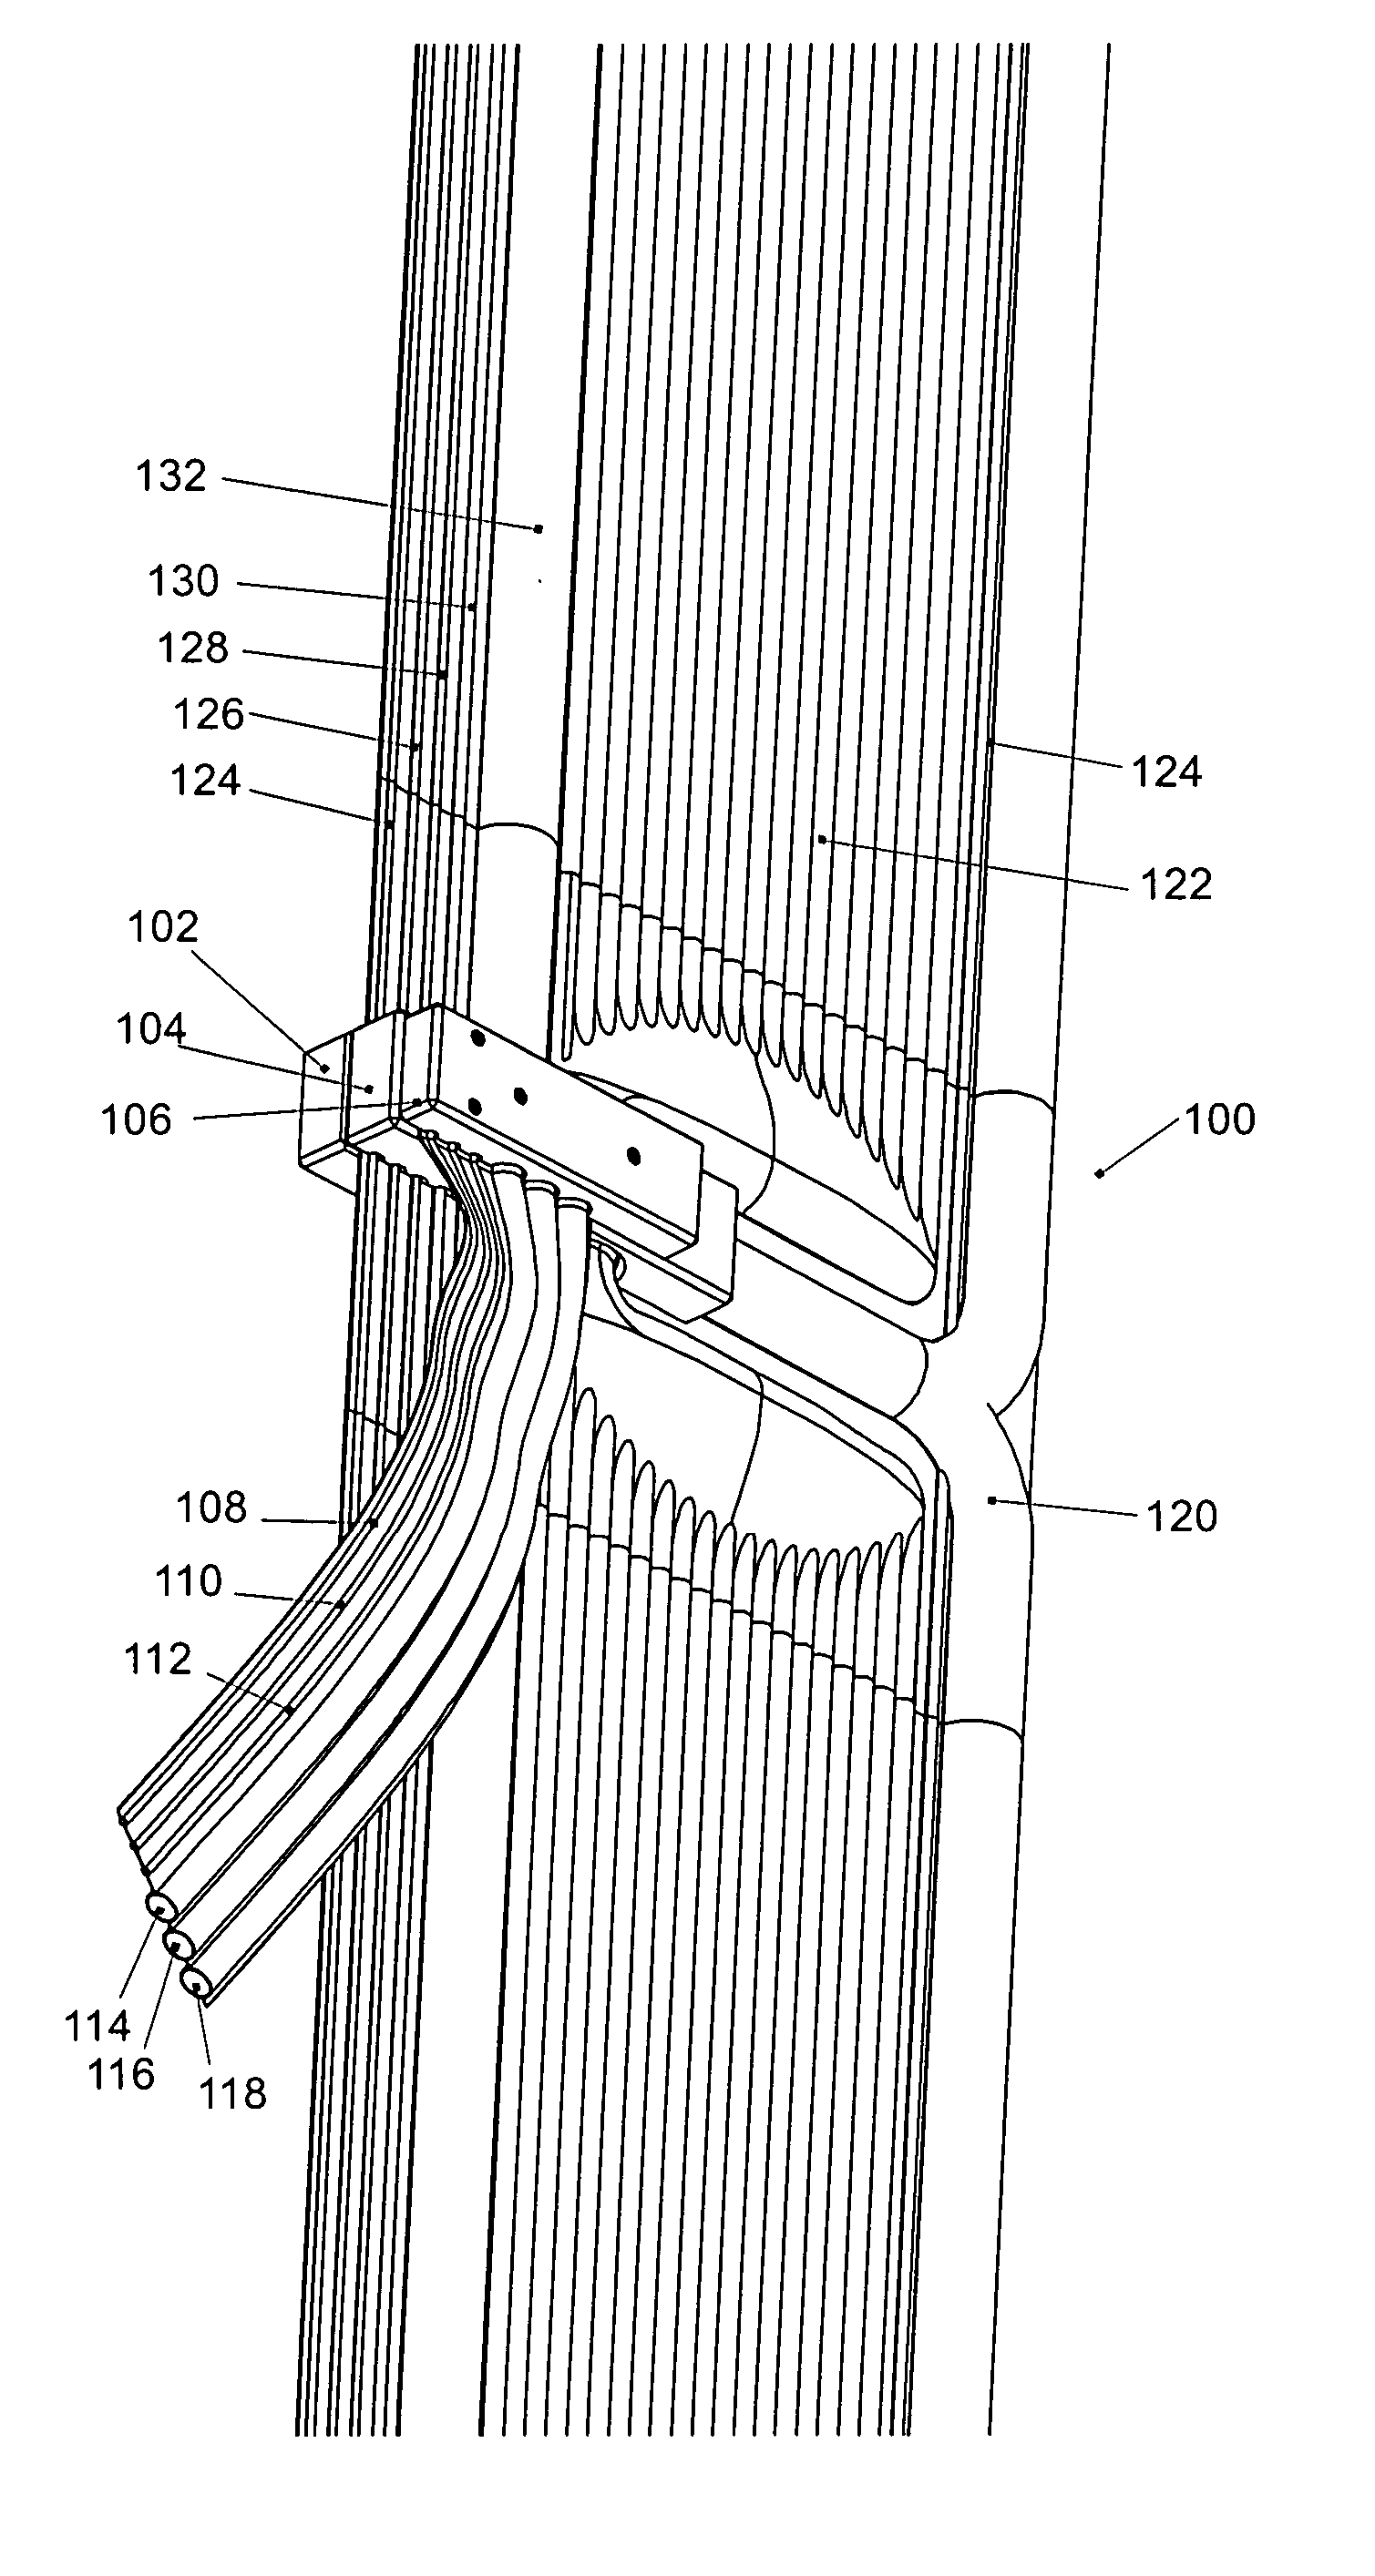 Low-cost interconnection system for solar energy modules and ancillary equipment